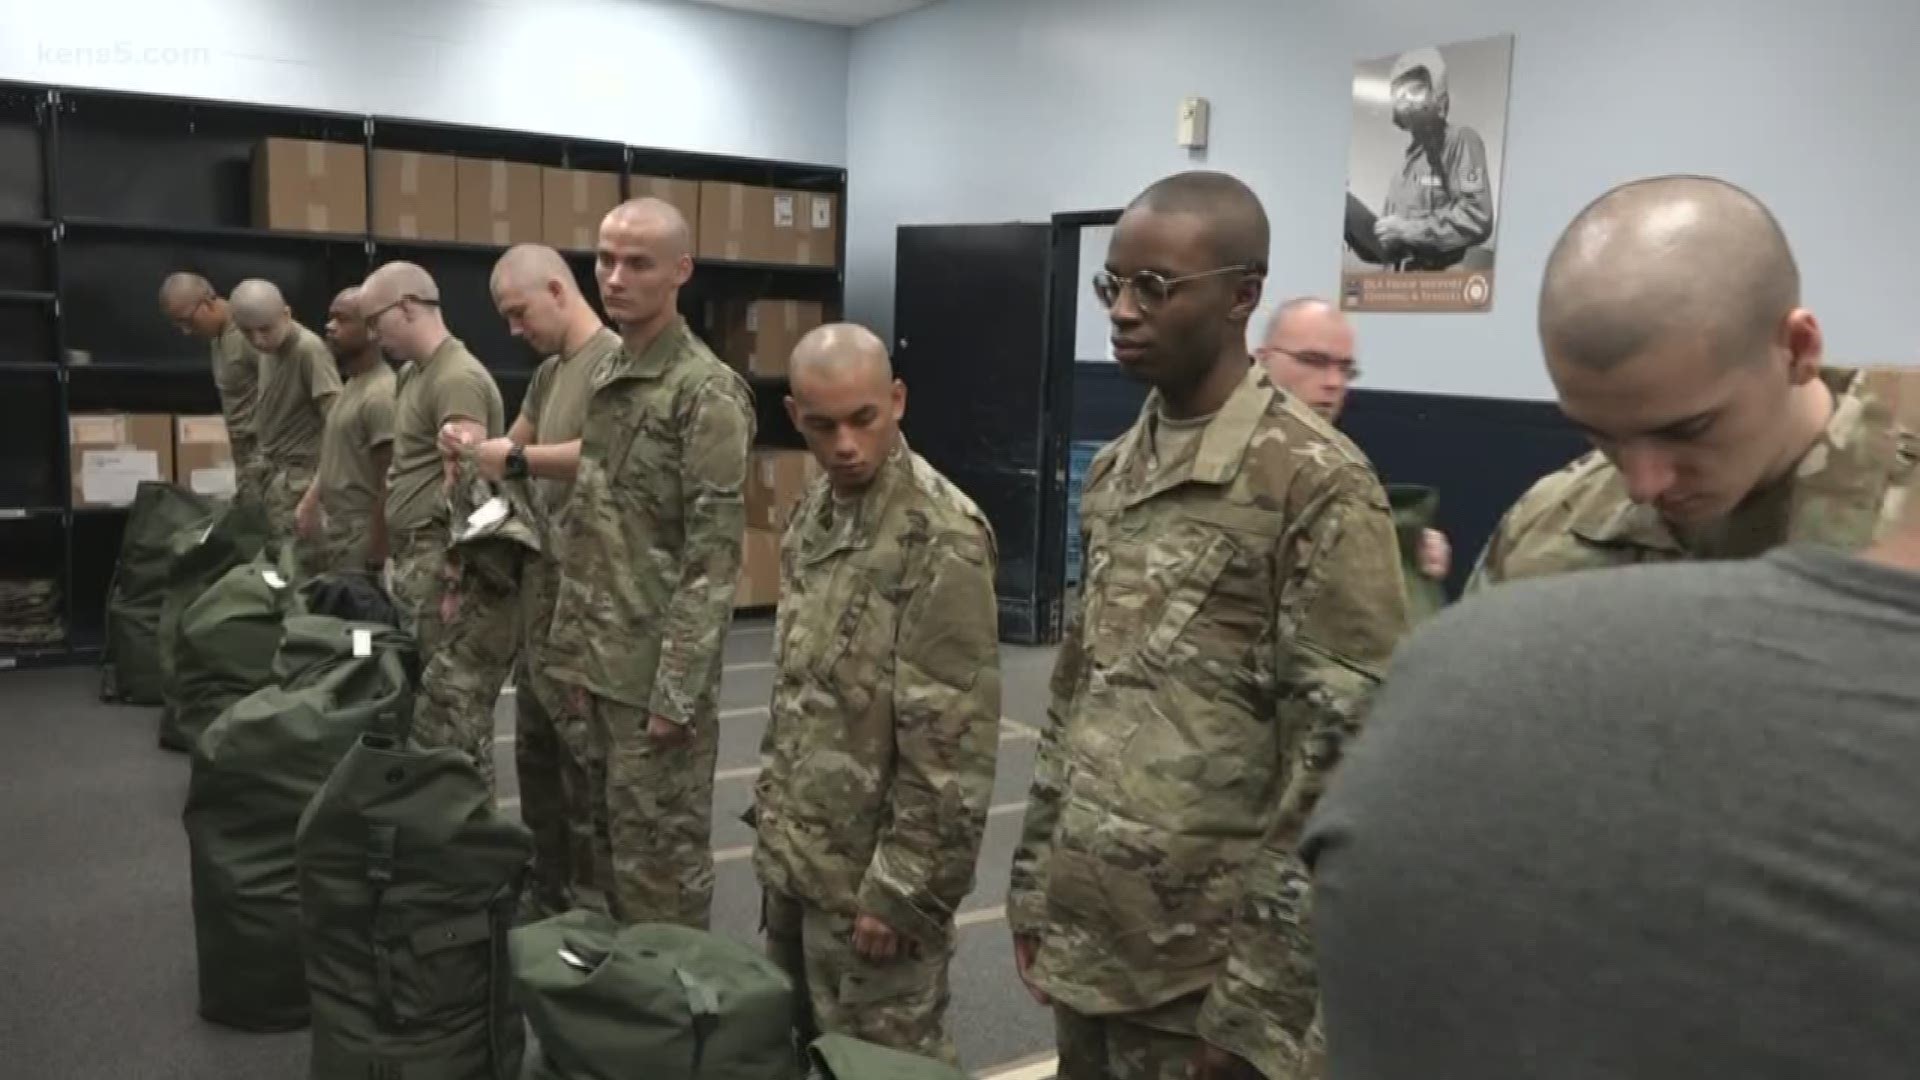 The Air Force is making a sweeping change with its appearance-- one that will make an impact on its airmen who serve alongside soldiers during deployment.